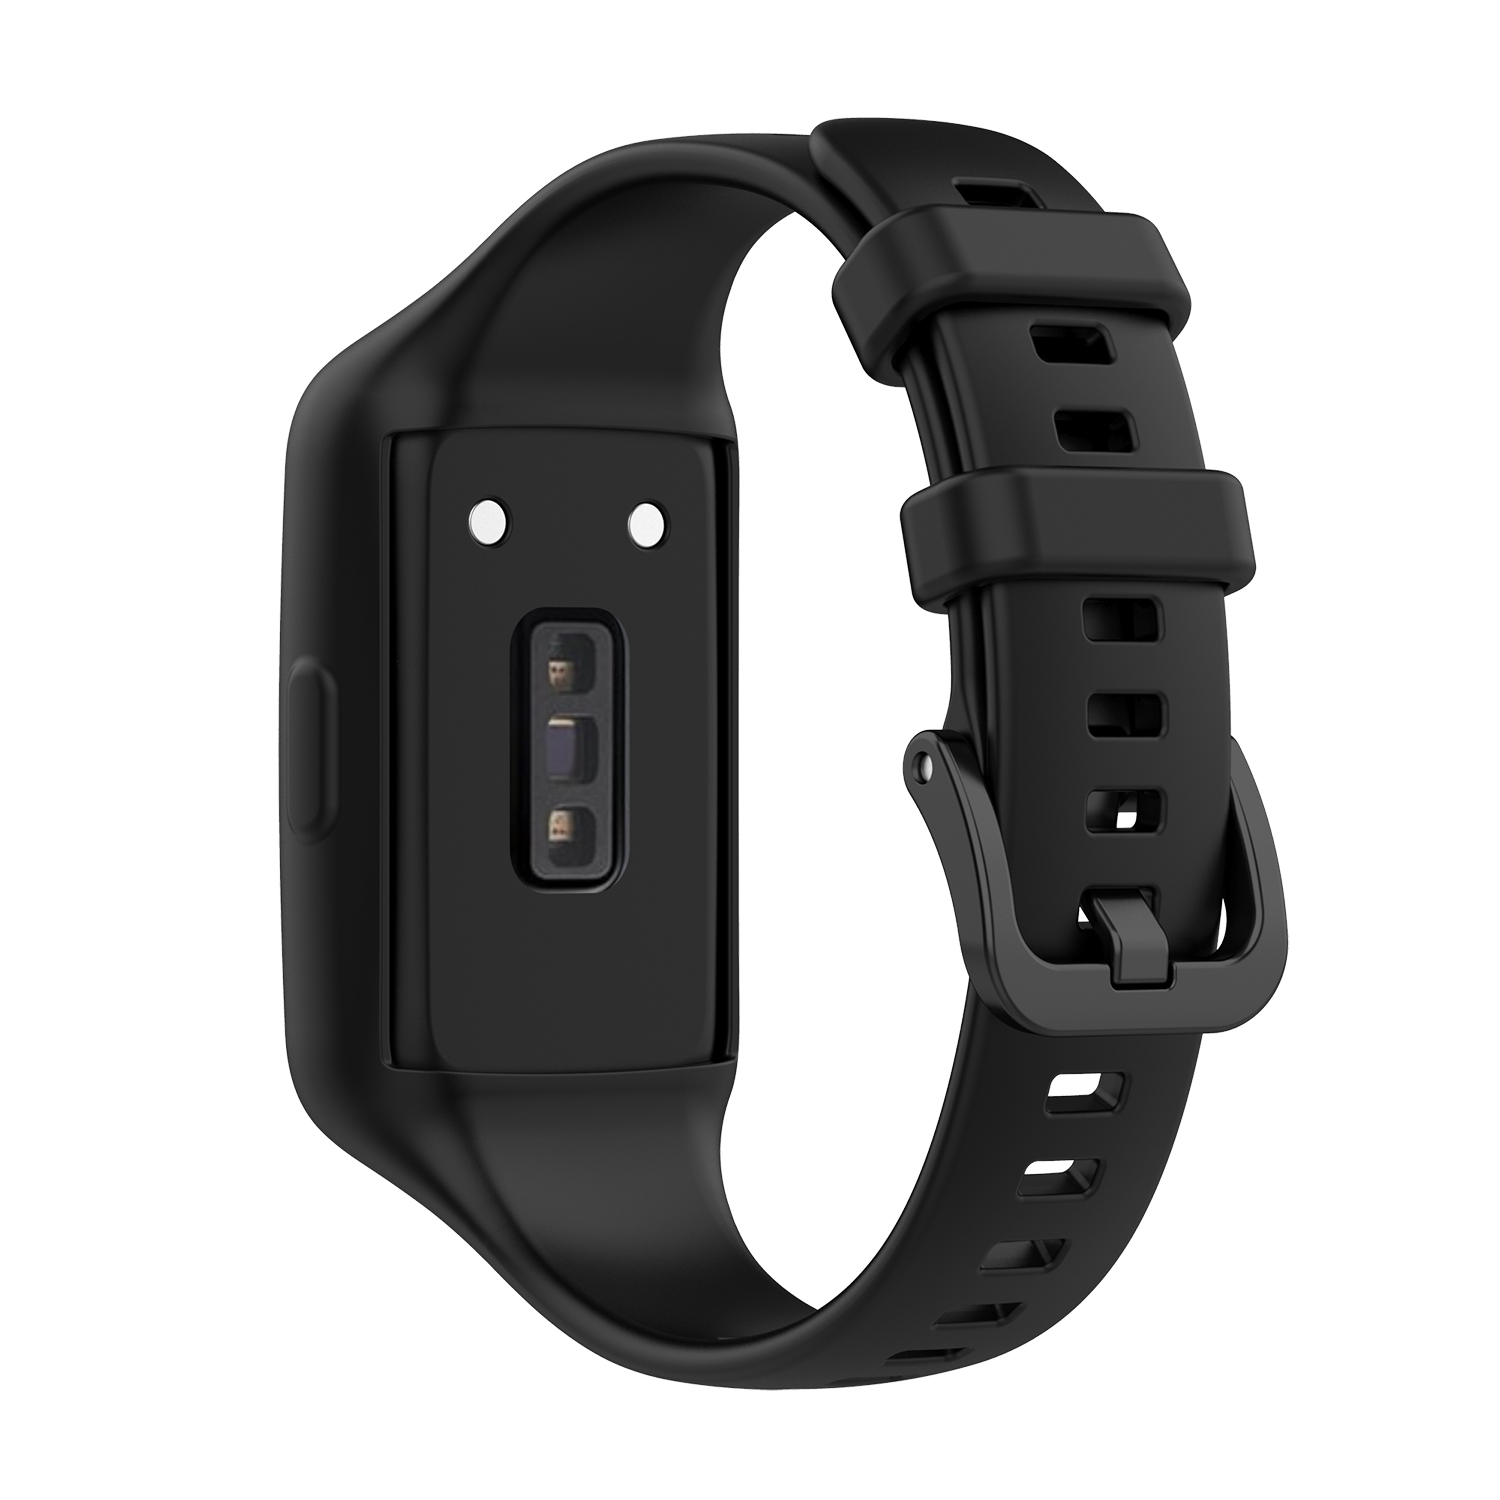 Find Bakeey 2 IN 1 Silicone Watch Band Strap Replacement for Huawei Band 6/ Honor Band 6 for Sale on Gipsybee.com with cryptocurrencies